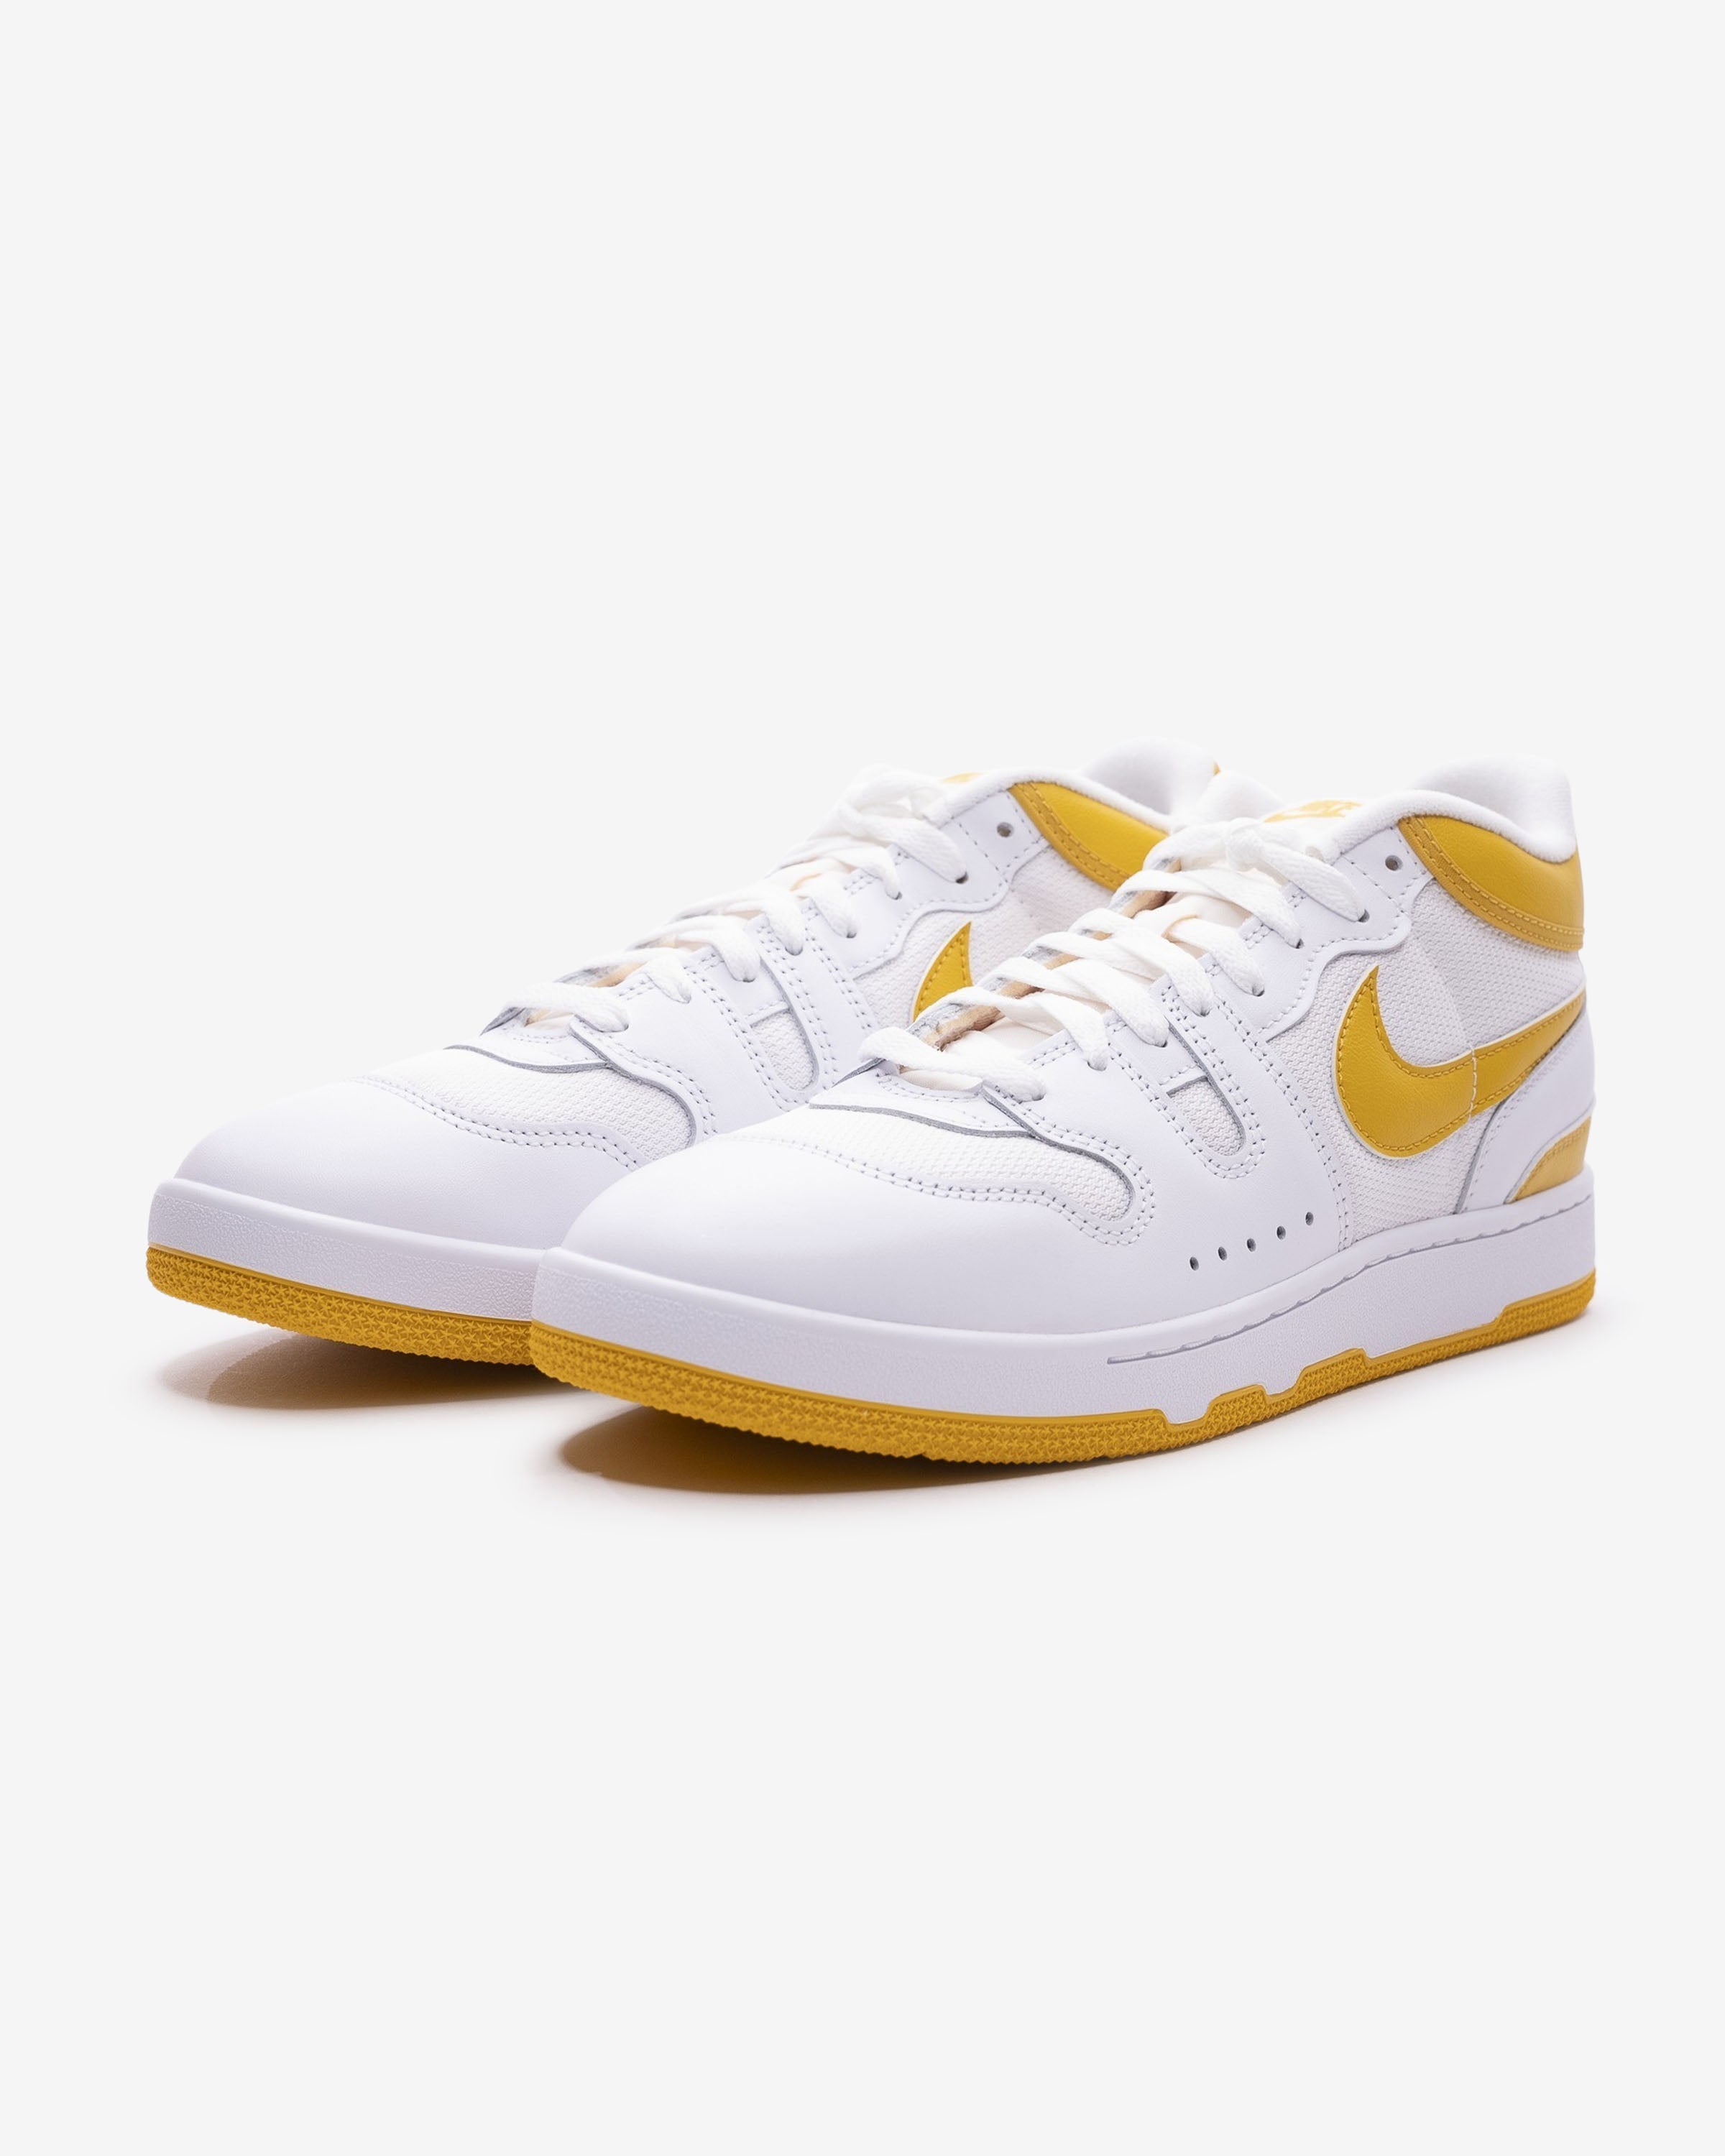 NIKE ATTACK QS SP – UNDEFEATED JAPAN